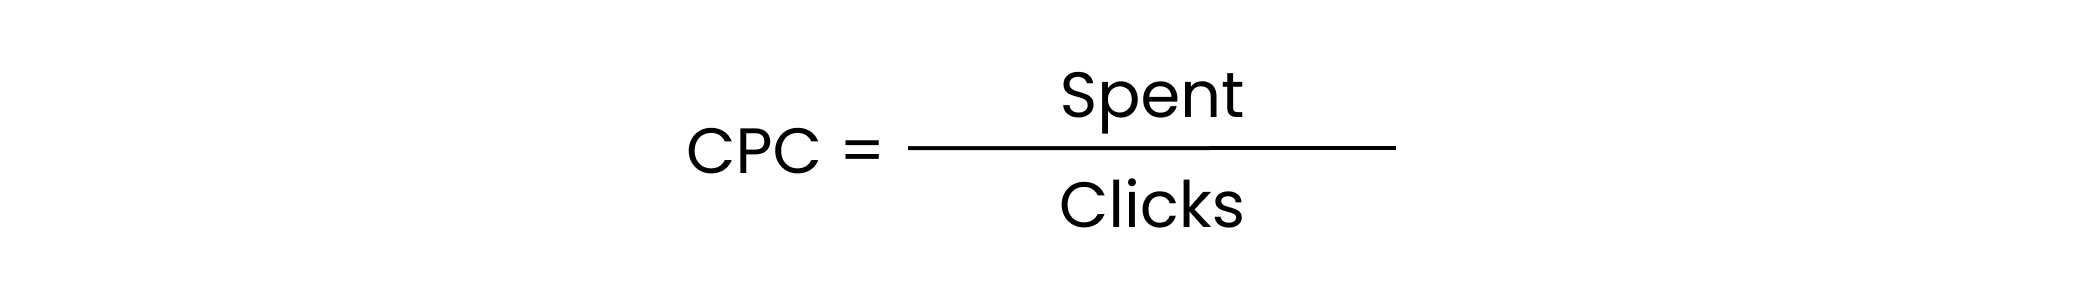 A formula for calculating Facebook ads CPC